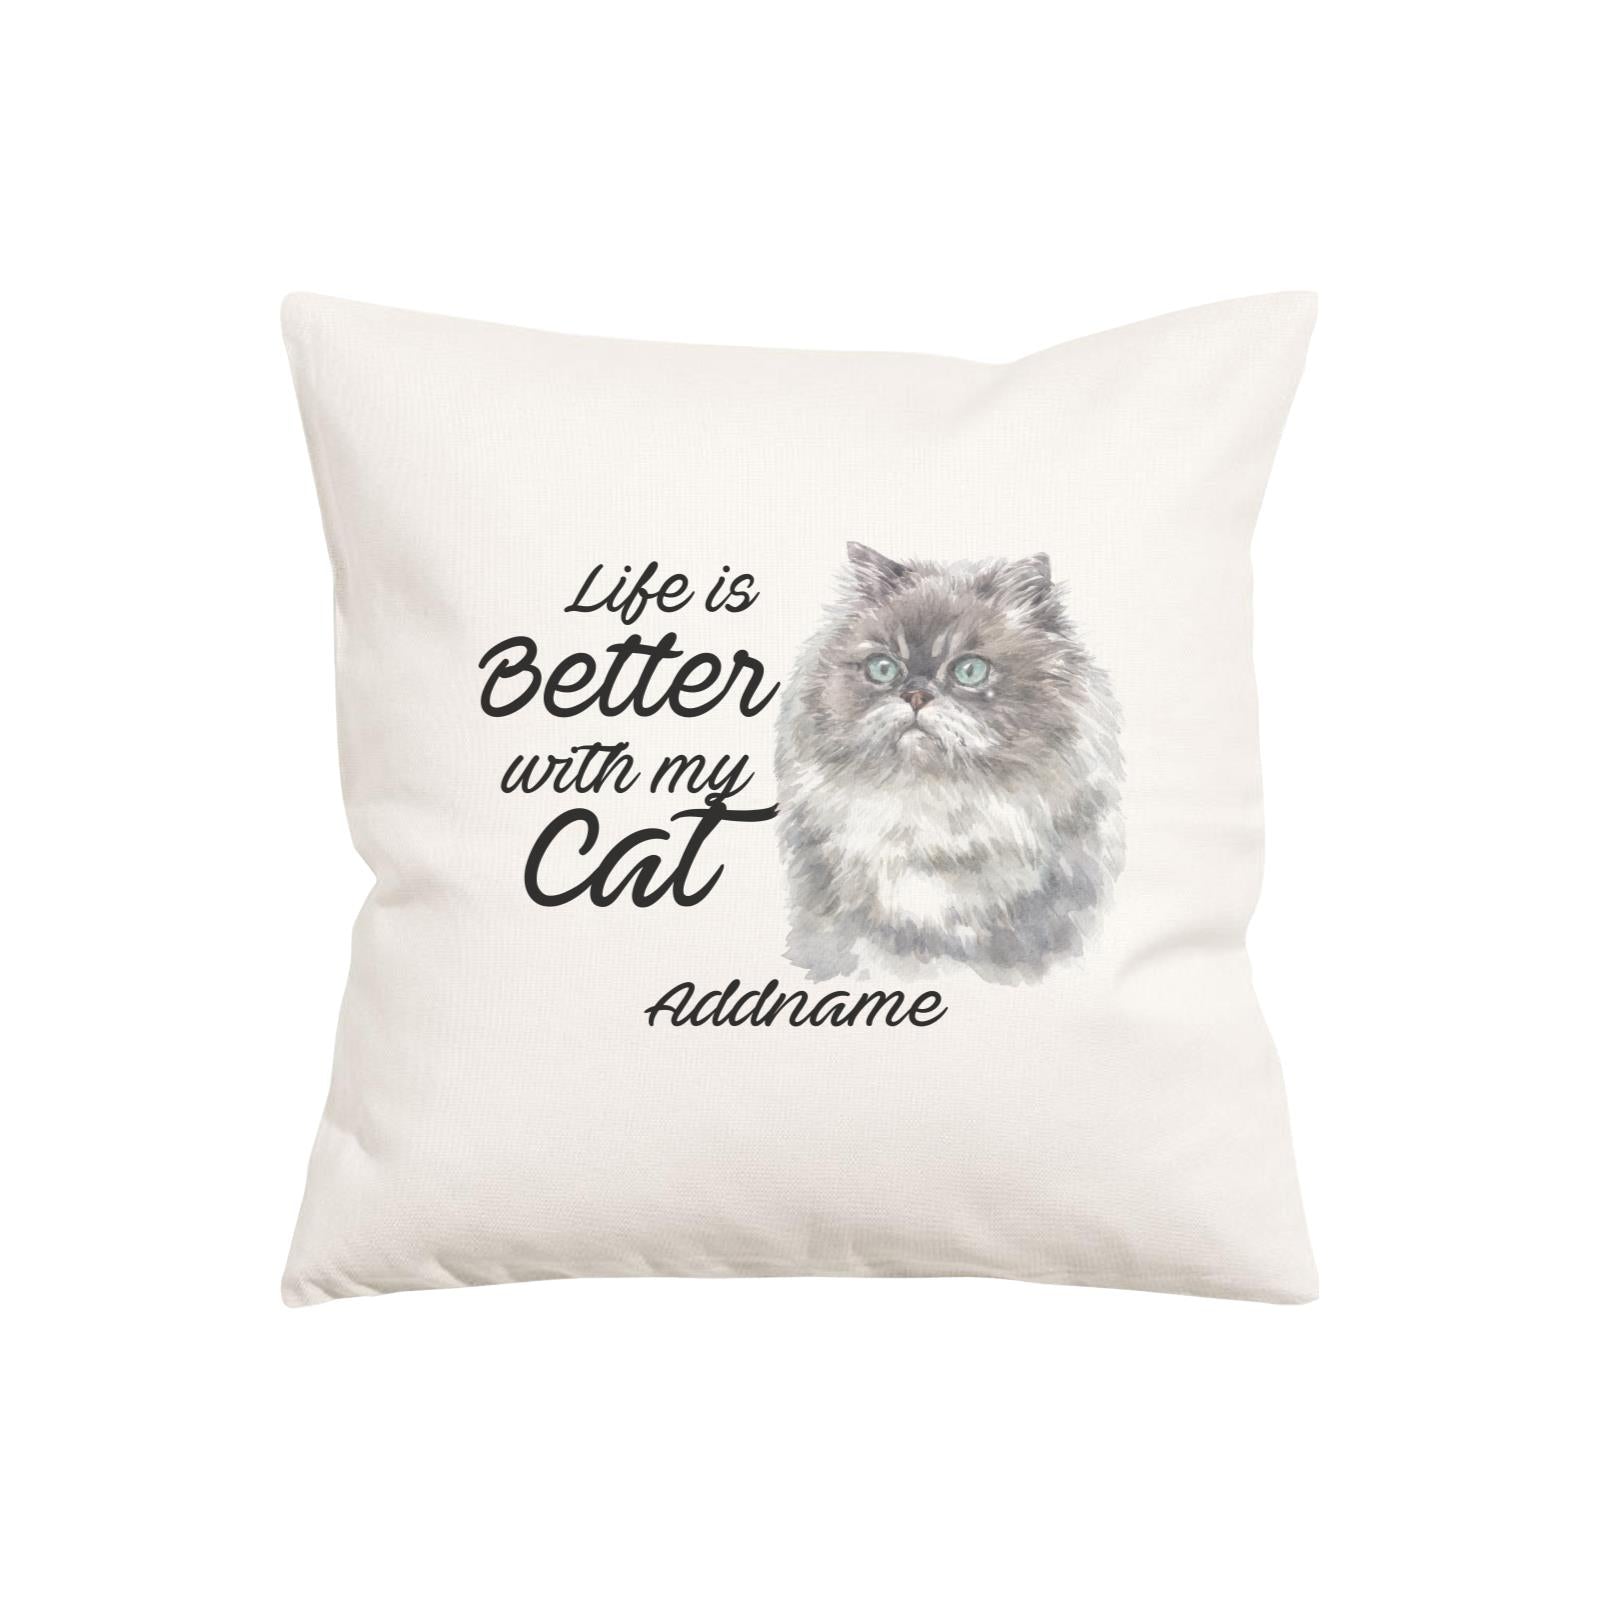 Watercolor Life is Better With My Cat Himalayan Addname Pillow Cushion